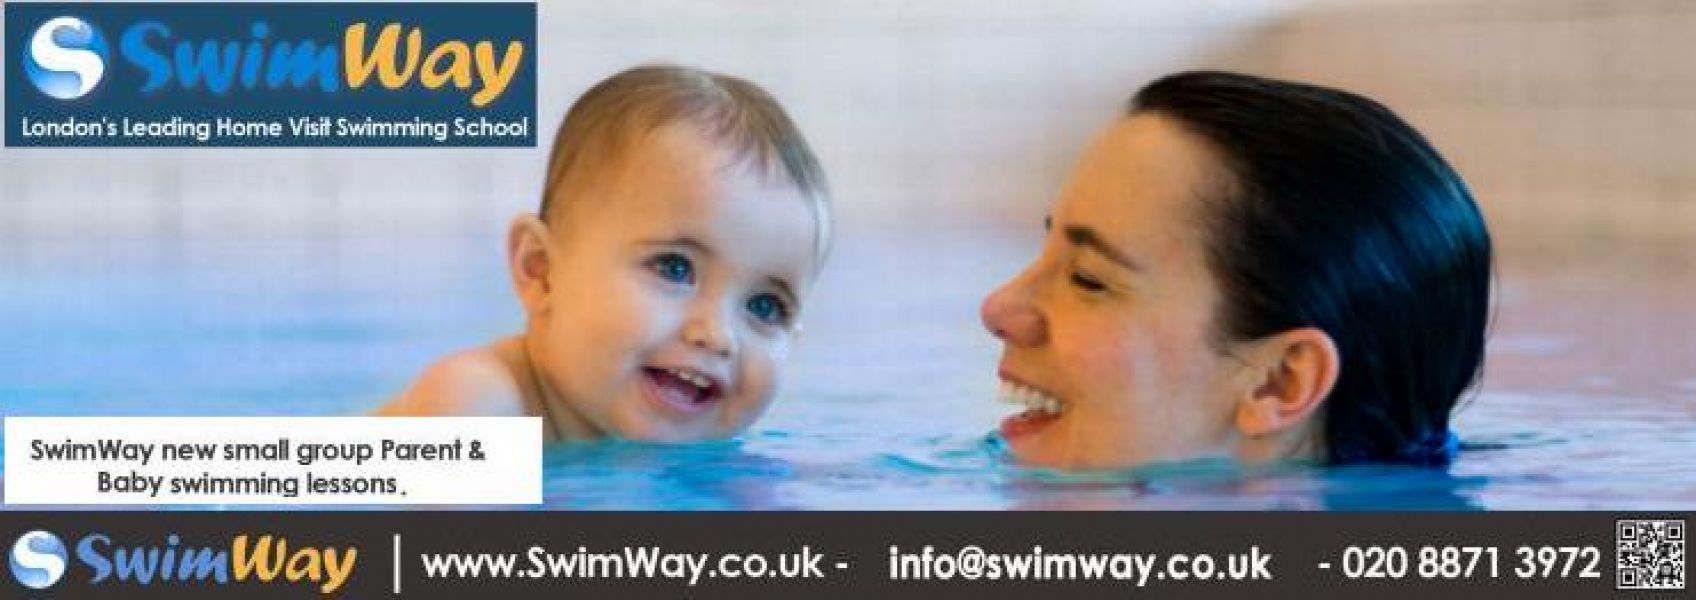 Parent & Baby Swimming Lessons in Kensington